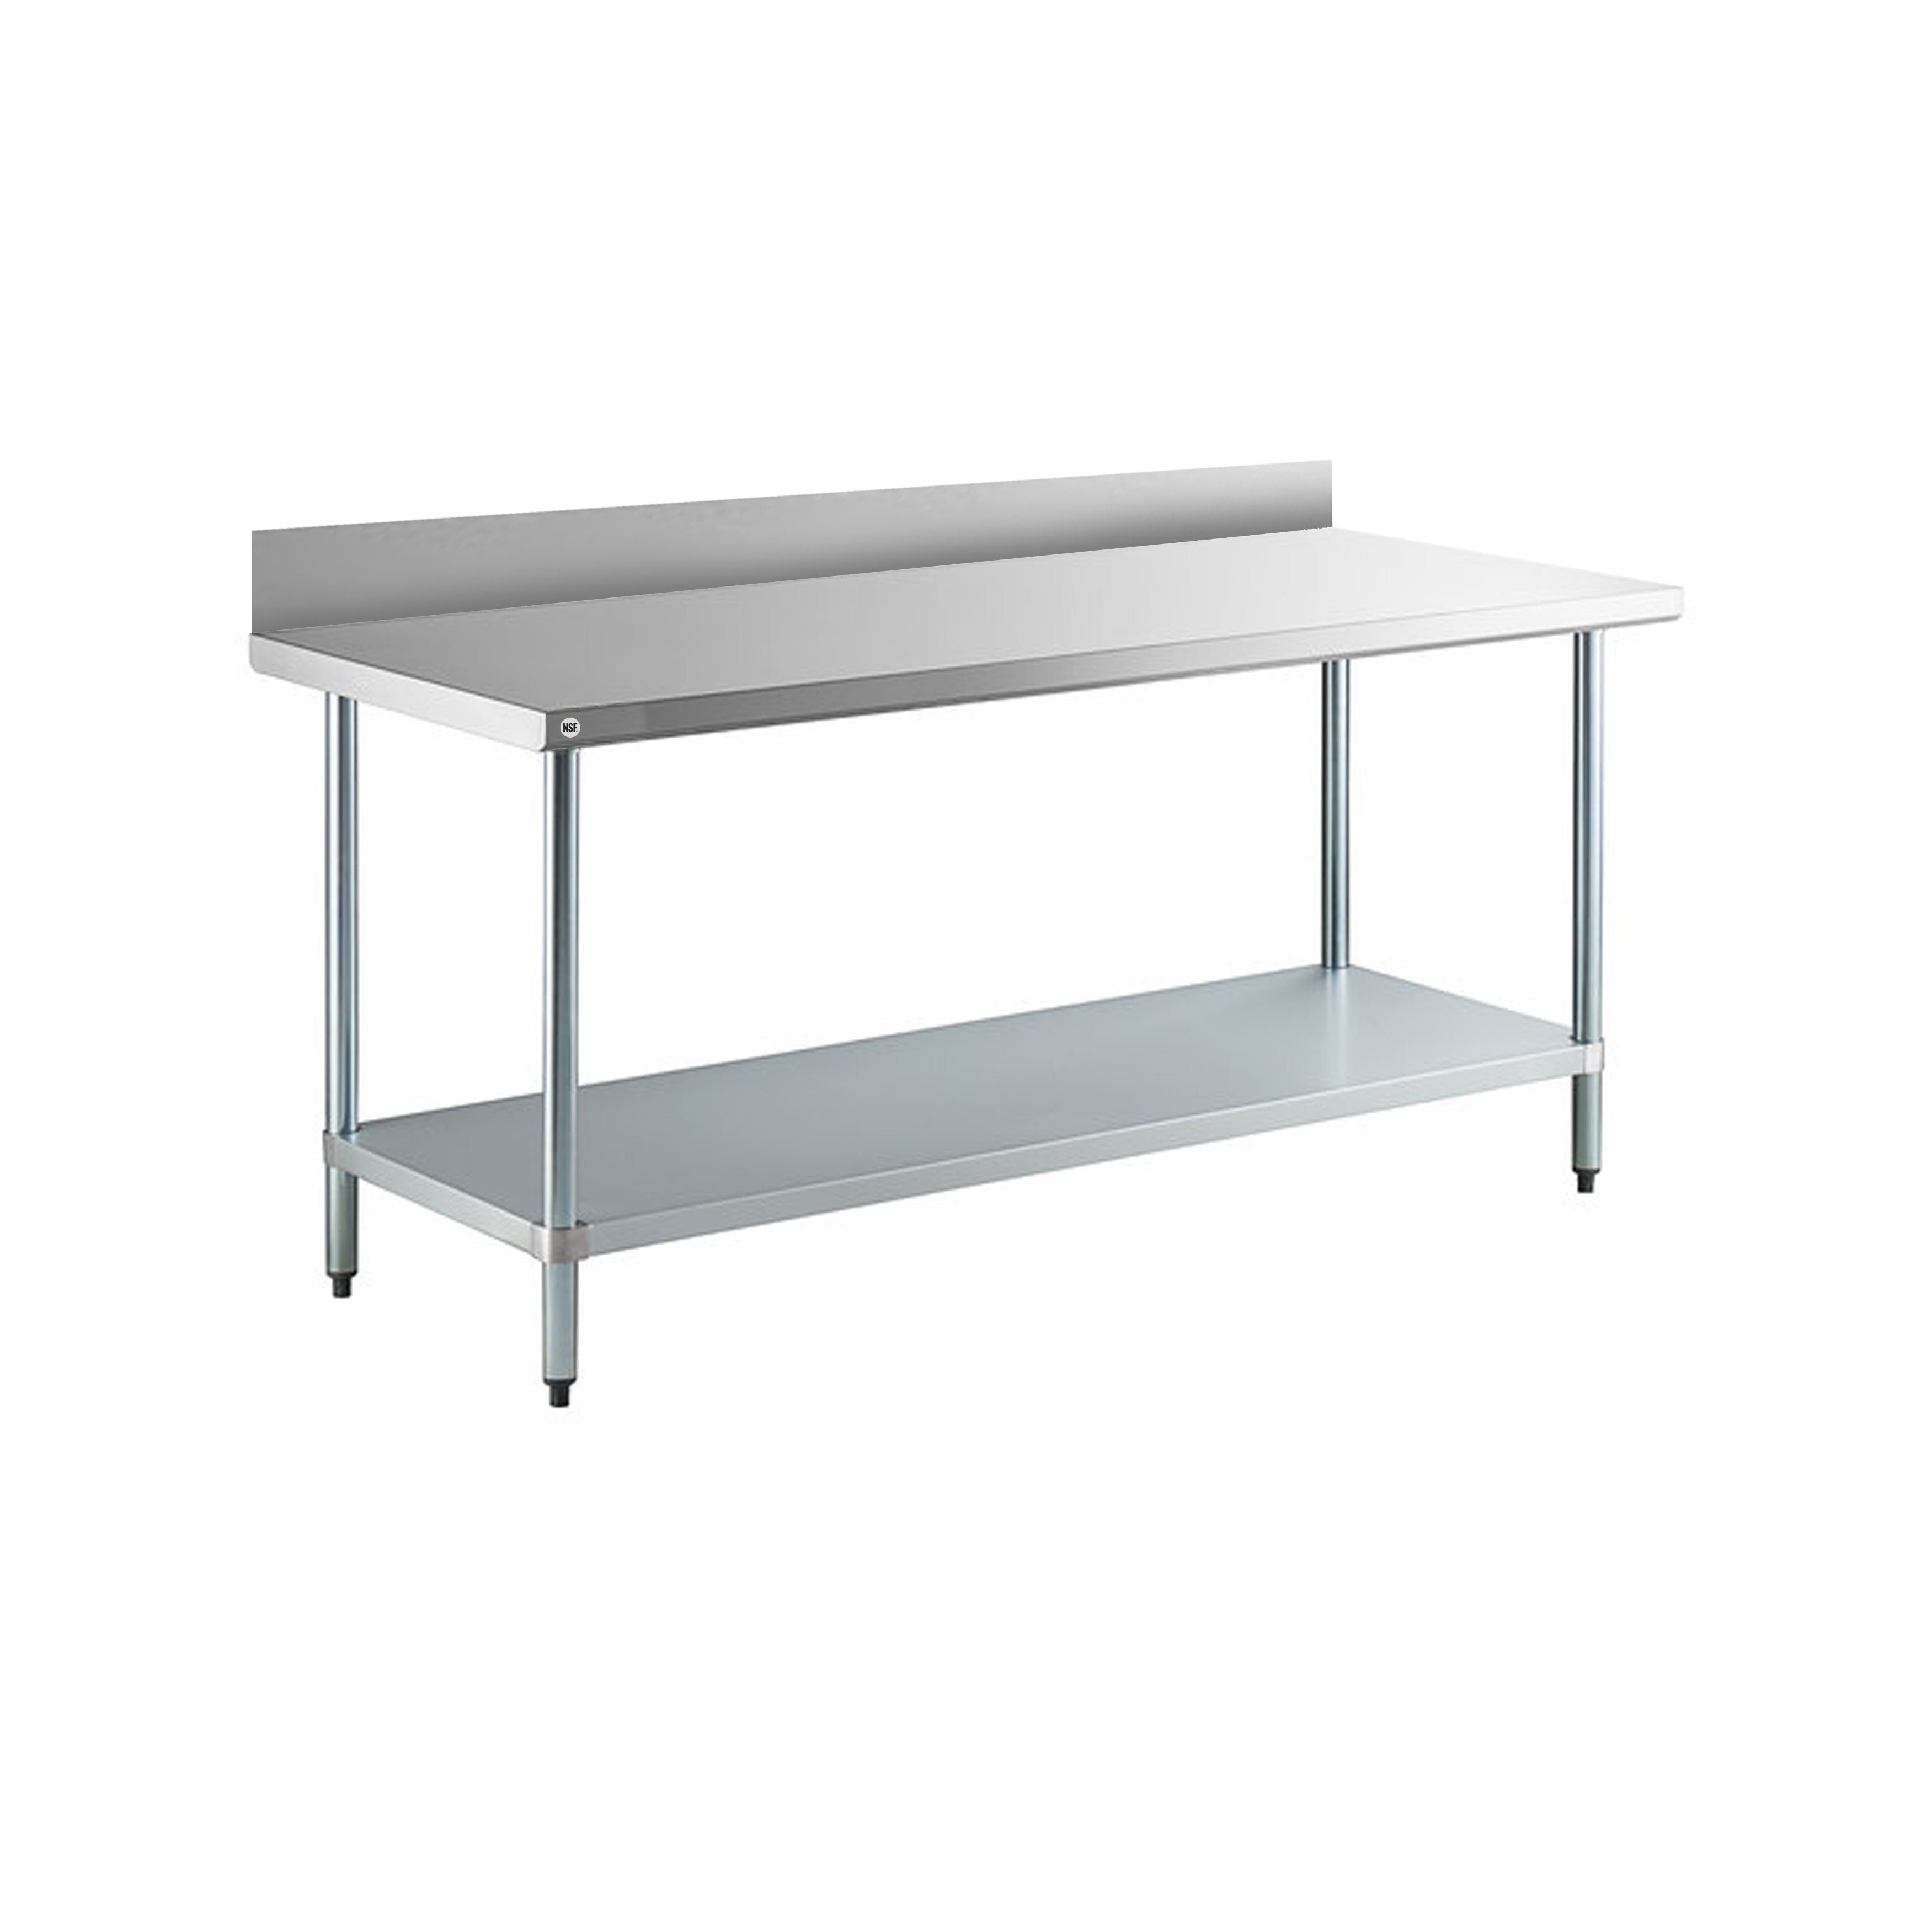 Omcan - 23801, Commercial 30" x 30" Stainless Steel Kitchen Work Table with 4" Back Splash 800lbs Medium Duty